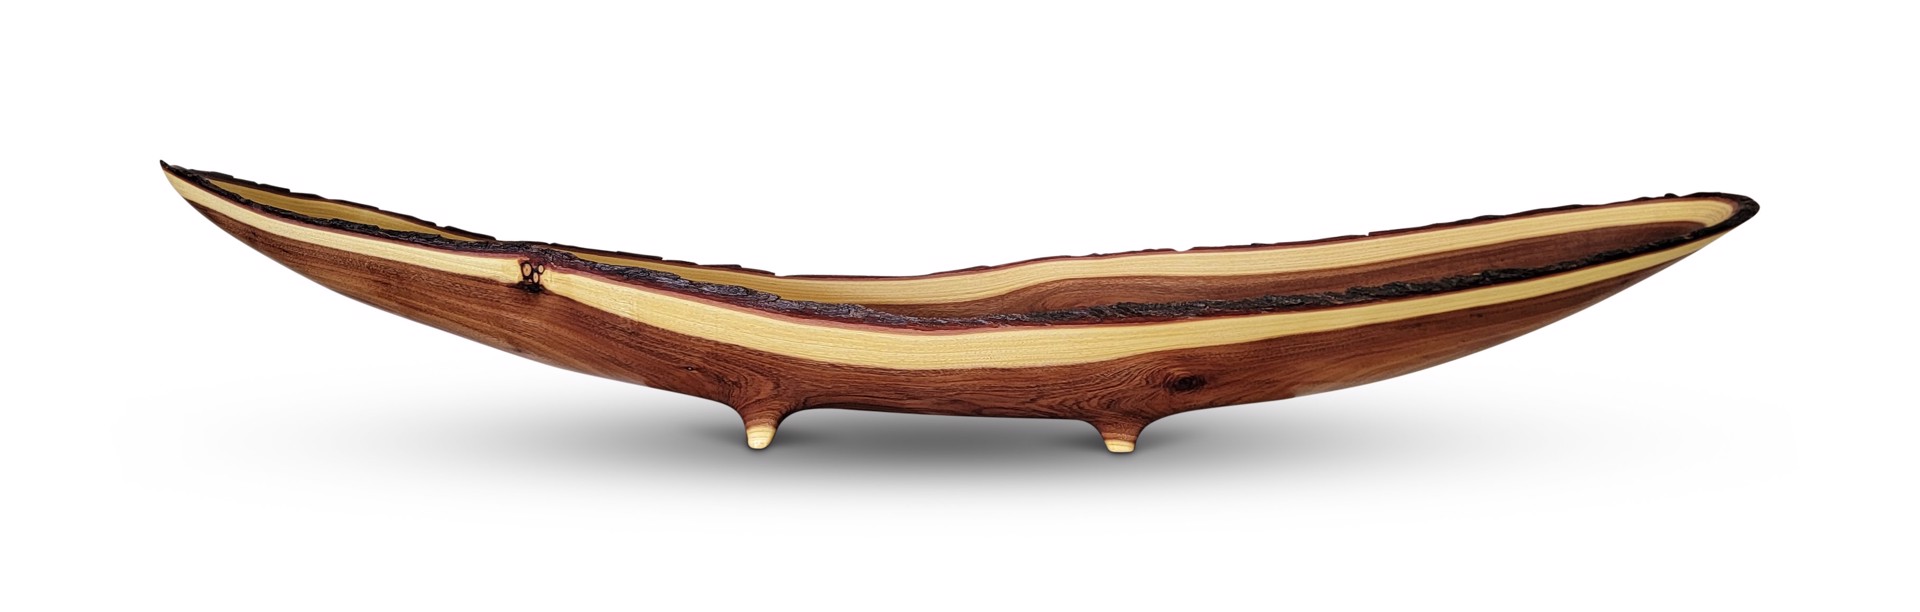 Acacia Boat - 4ft Boat Shaped Vessel made from Acacia Wood by Scott & Stephanie Shangraw